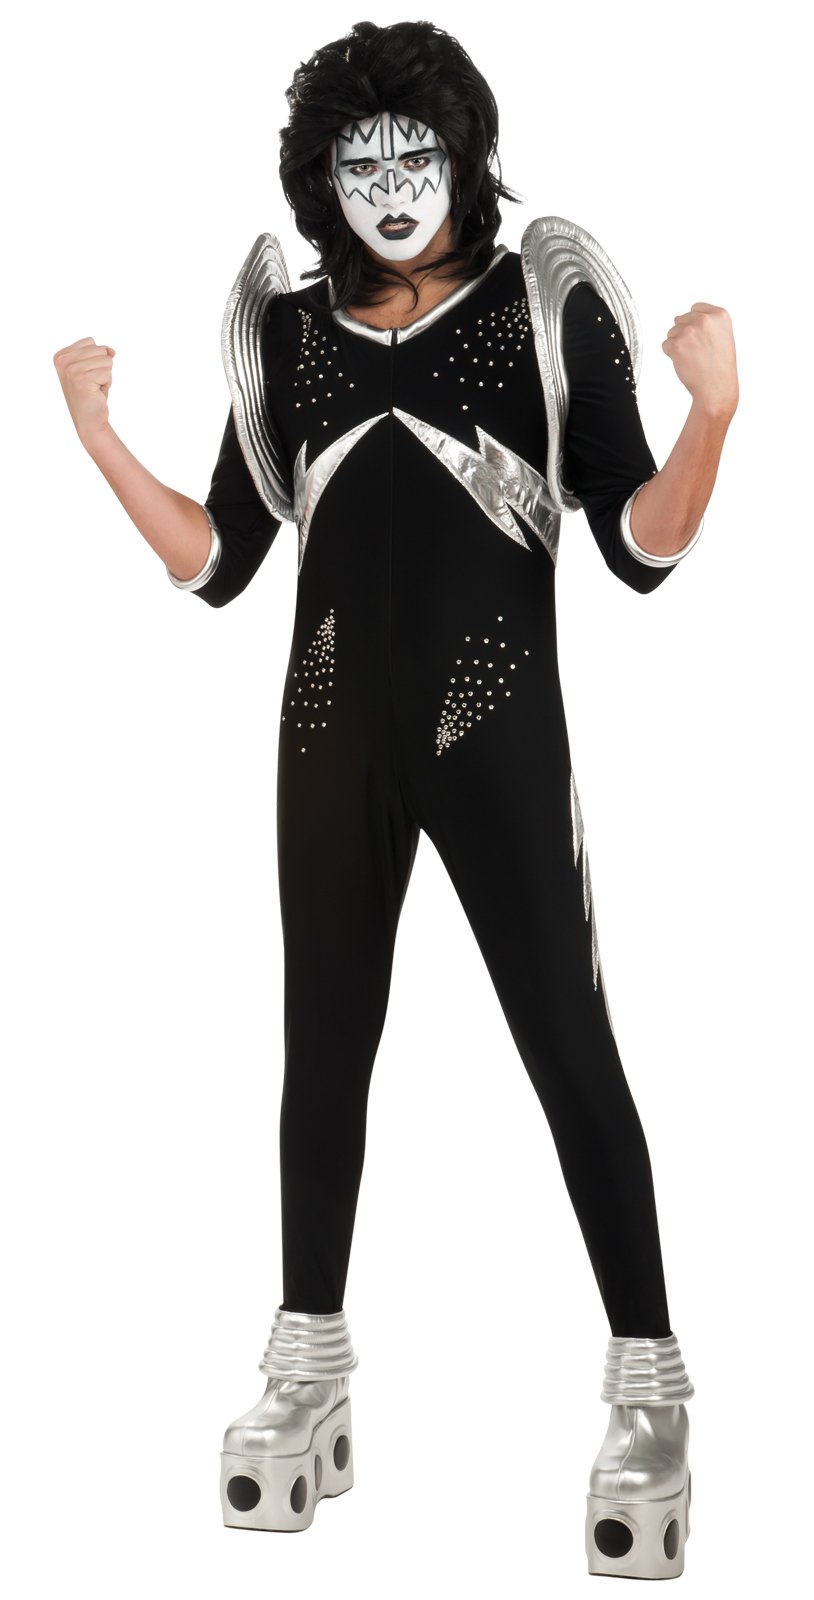 KISS - The Authentic Spaceman Adult Costume